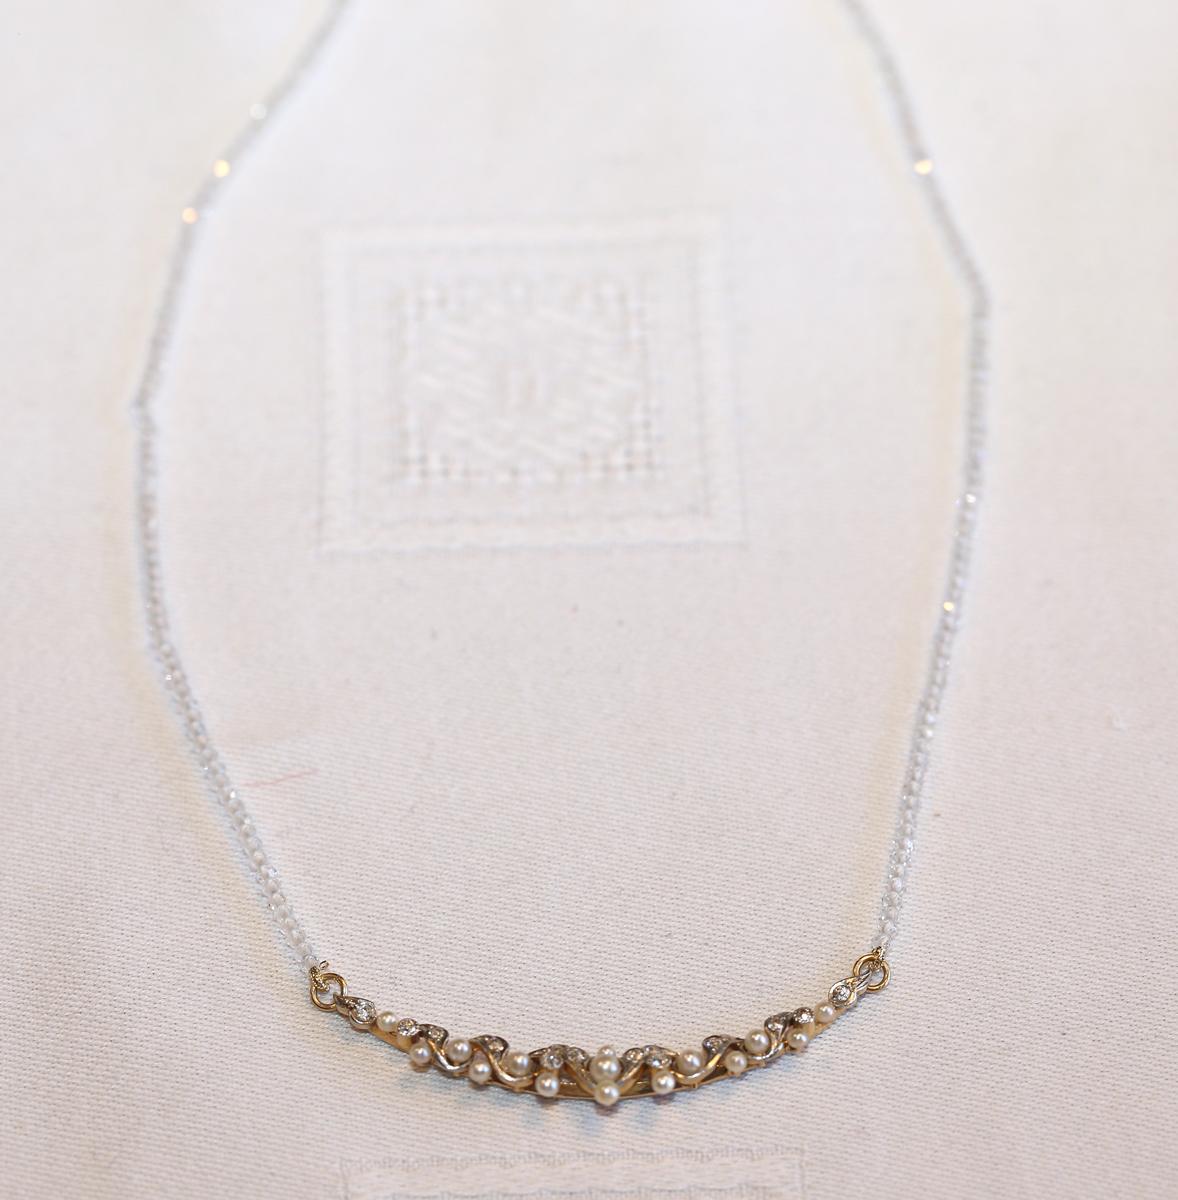 Pearls Old-Mine Diamonds Crescent pendant. Created around 1930.
Fine and delicate Pearls Old-mine Diamonds Crescent on rock crystal chain with the gold lock. A perfect accessory for any modern outfit. It is a joy to try to incorporate it with